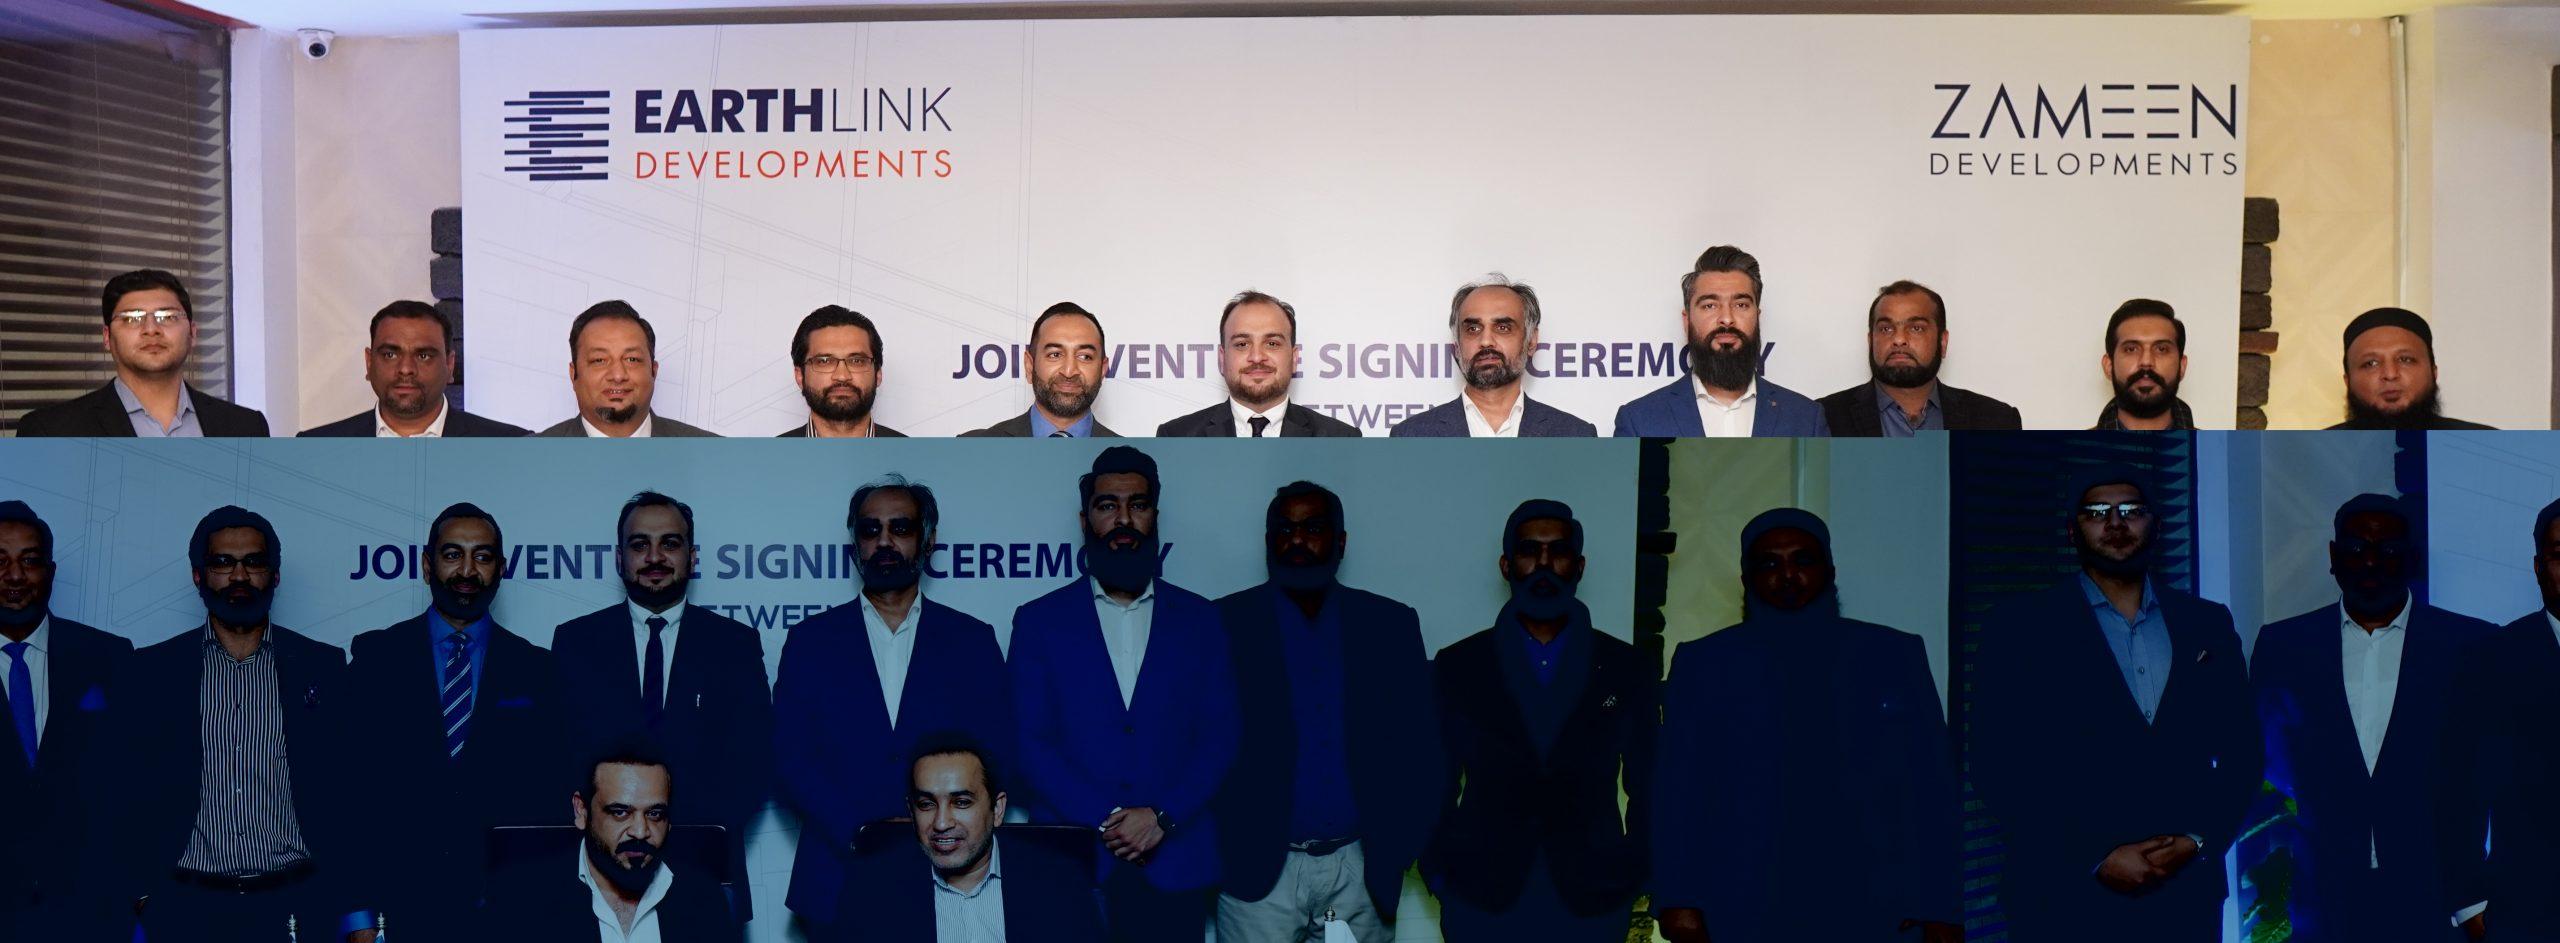 Zameen Developments, Earthlink Developments sign MoU for multipurpose project in Bahria Town Islamabad